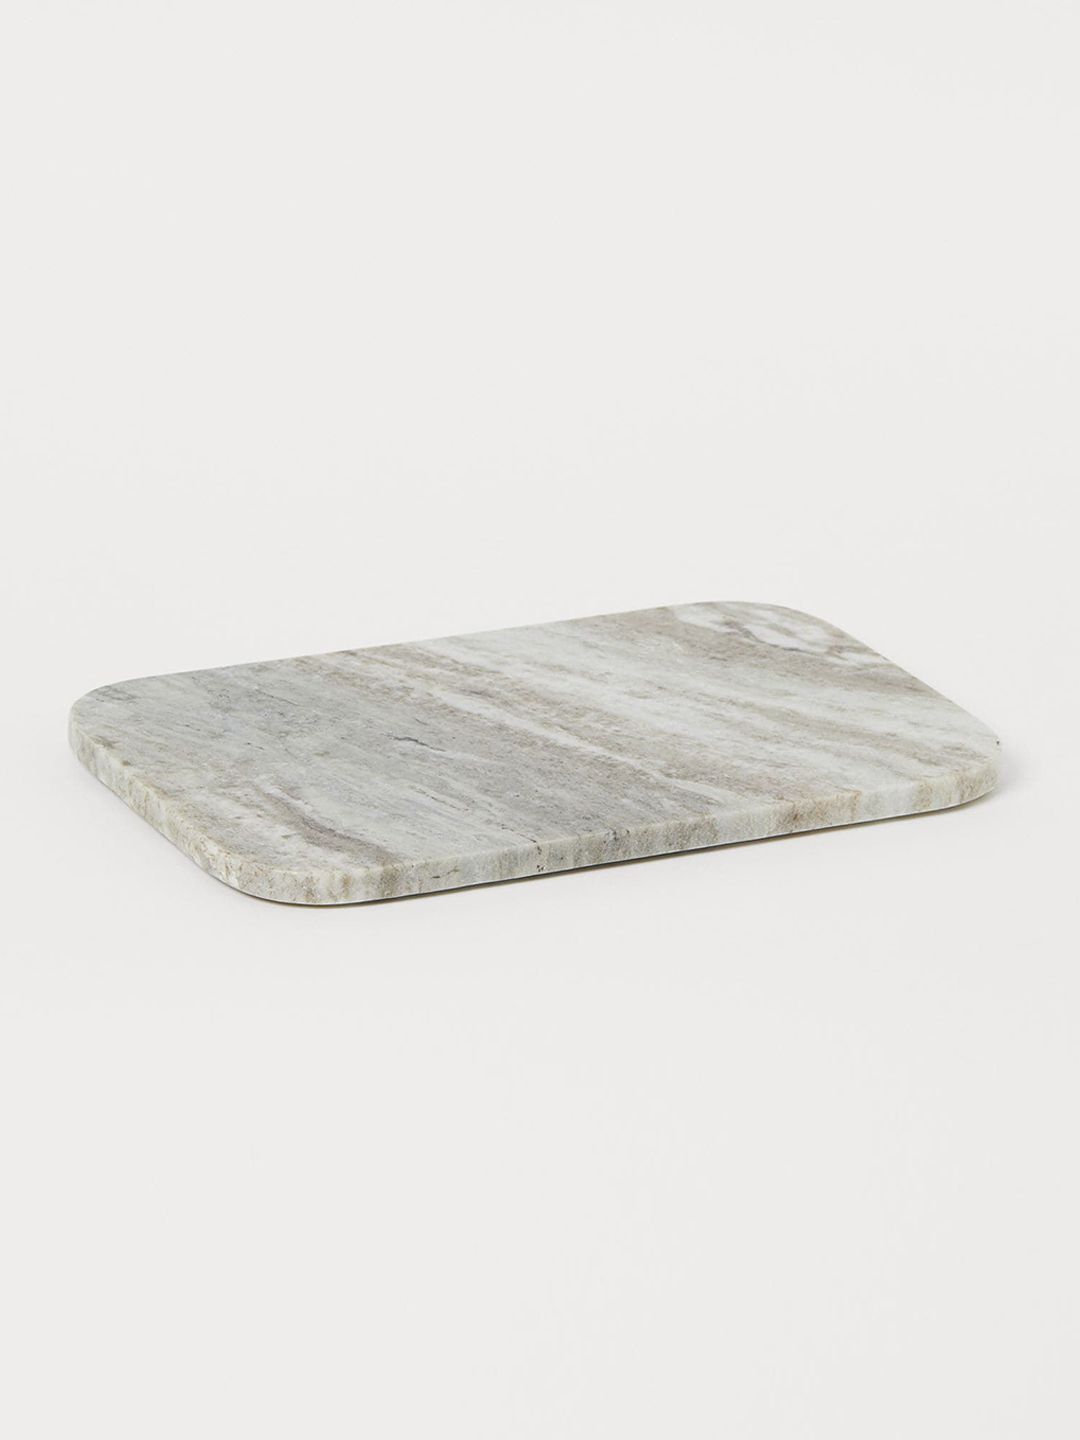 H&M Grey Marble Serving Tray Price in India